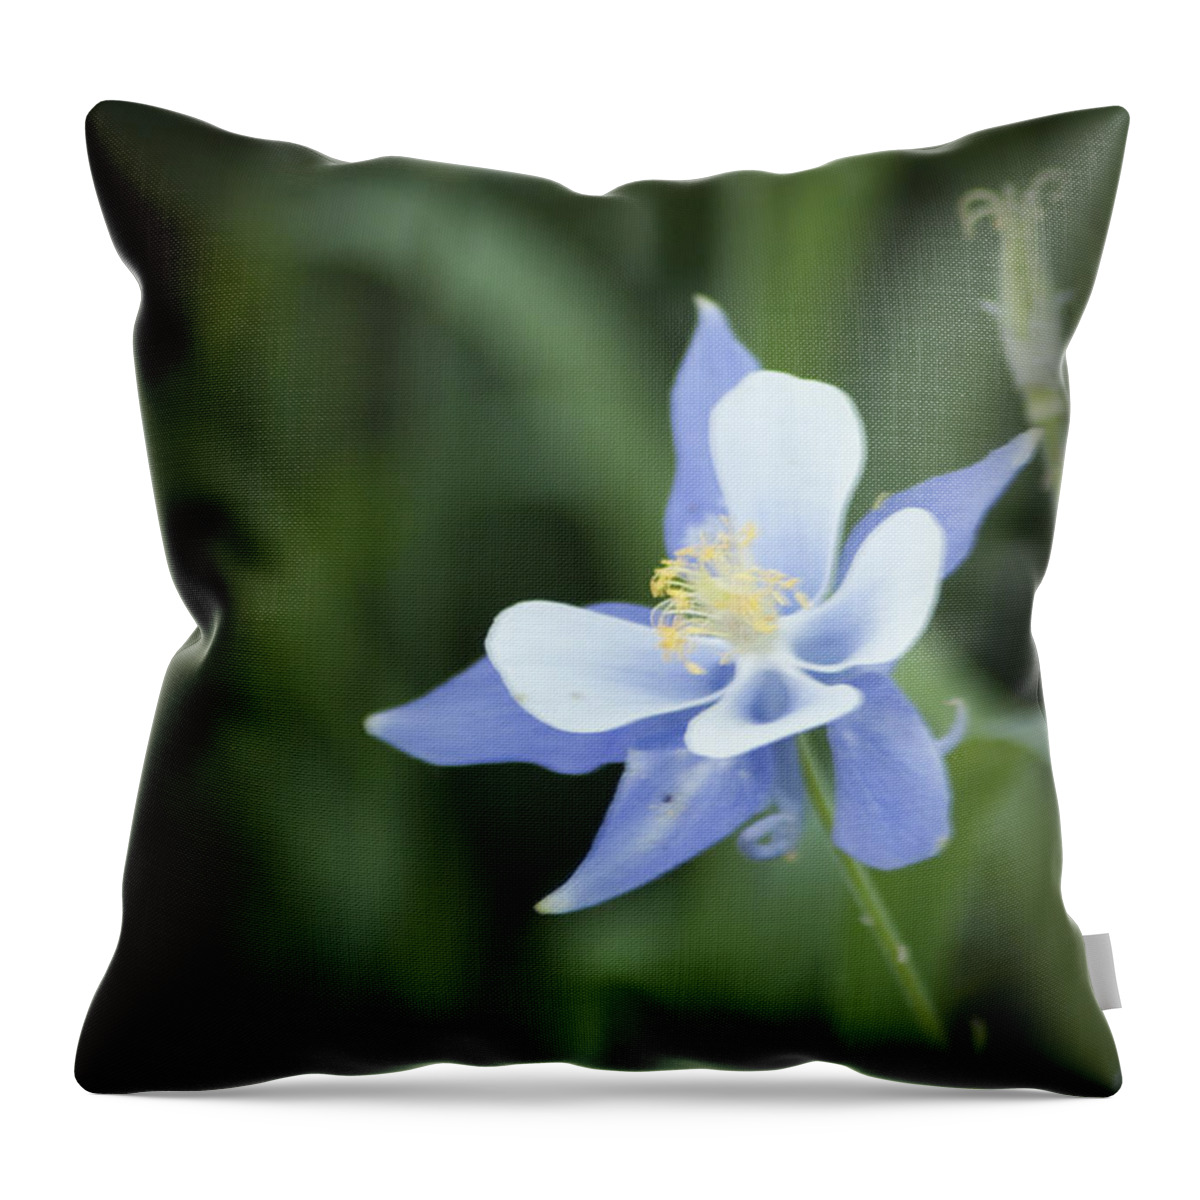 Colorado State Flower Throw Pillow featuring the photograph Columbine by Daniel Hebard